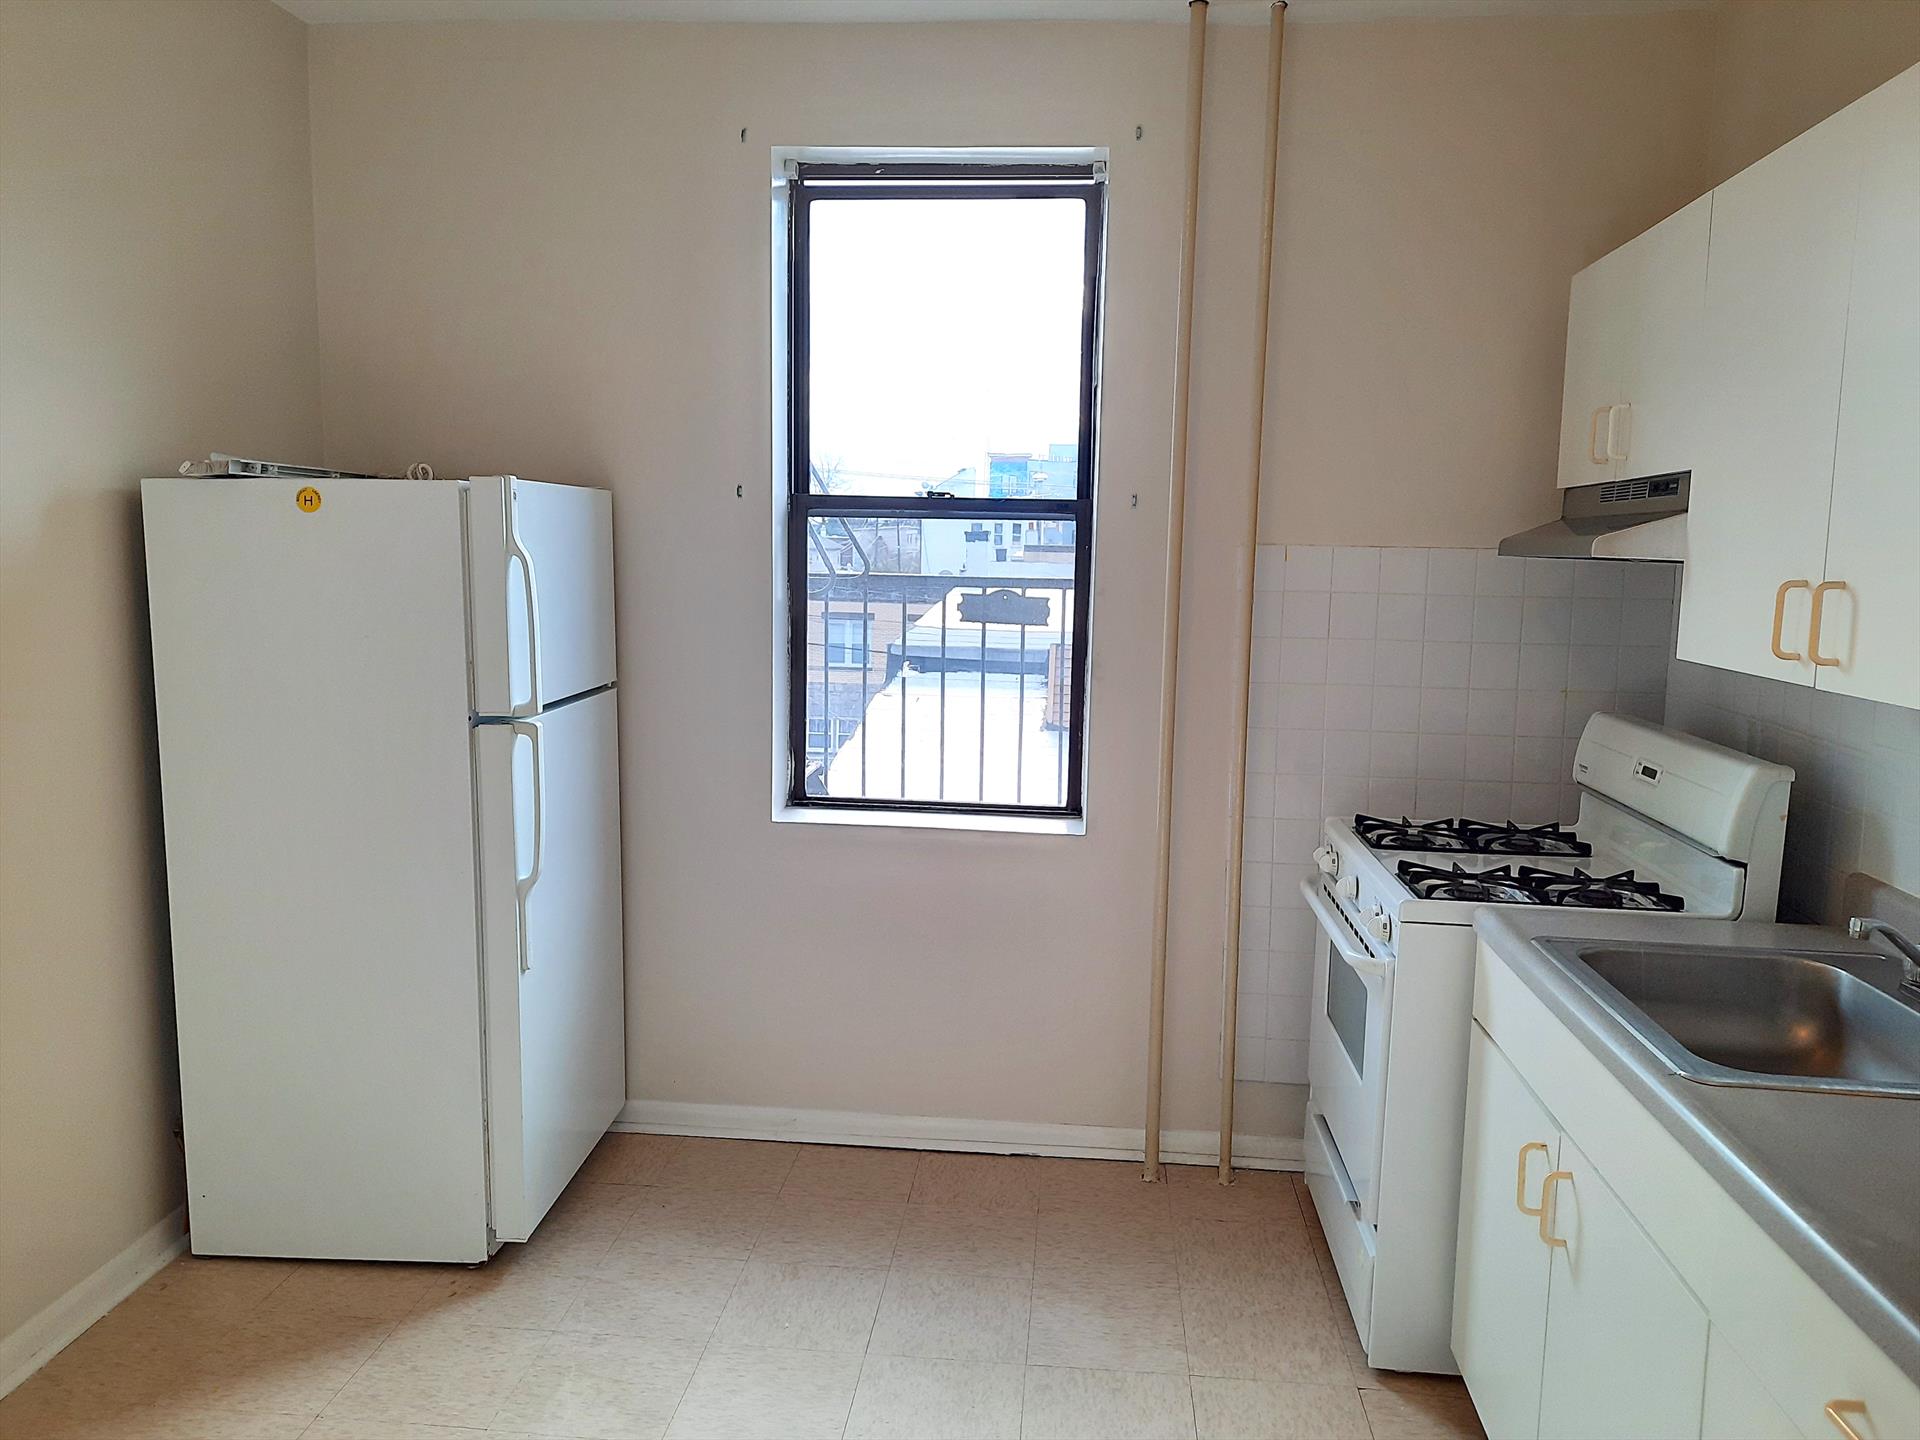 Move into this charming North Bergen 1 bedroom condo rental located at 7111 Palisade Avenue.  Features: great natural light, hardwood floors throughout, eat-in kitchen with refrigerator and gas stove, living room (12' x 12.4'), separate bedroom that can easily accommodate a Queen bed (11.5' x 11'),  ample closets, full bathroom with tub, HEAT AND HOT WATER INCLUDED!, 3rd floor of a walk up, laundry room in basement, solid Pre-war brick building, close to Bergenline Avenue commercial district, restaurants, shopping, parks, and public transportation to NYC.  No pets.  Available April 15th, 2023.  To make this lovely rental yours: $1575 (1st months rent) $2363 (security deposit), $1575 (broker fee), $65 (credit report per adult).  Tenants must have great credit history and verifiable income.  Call Victor Alicea (Liberty Realty) at 917-617-9906 (m) or 201-610-1010 ext. 321.  Se habla Espanol.  